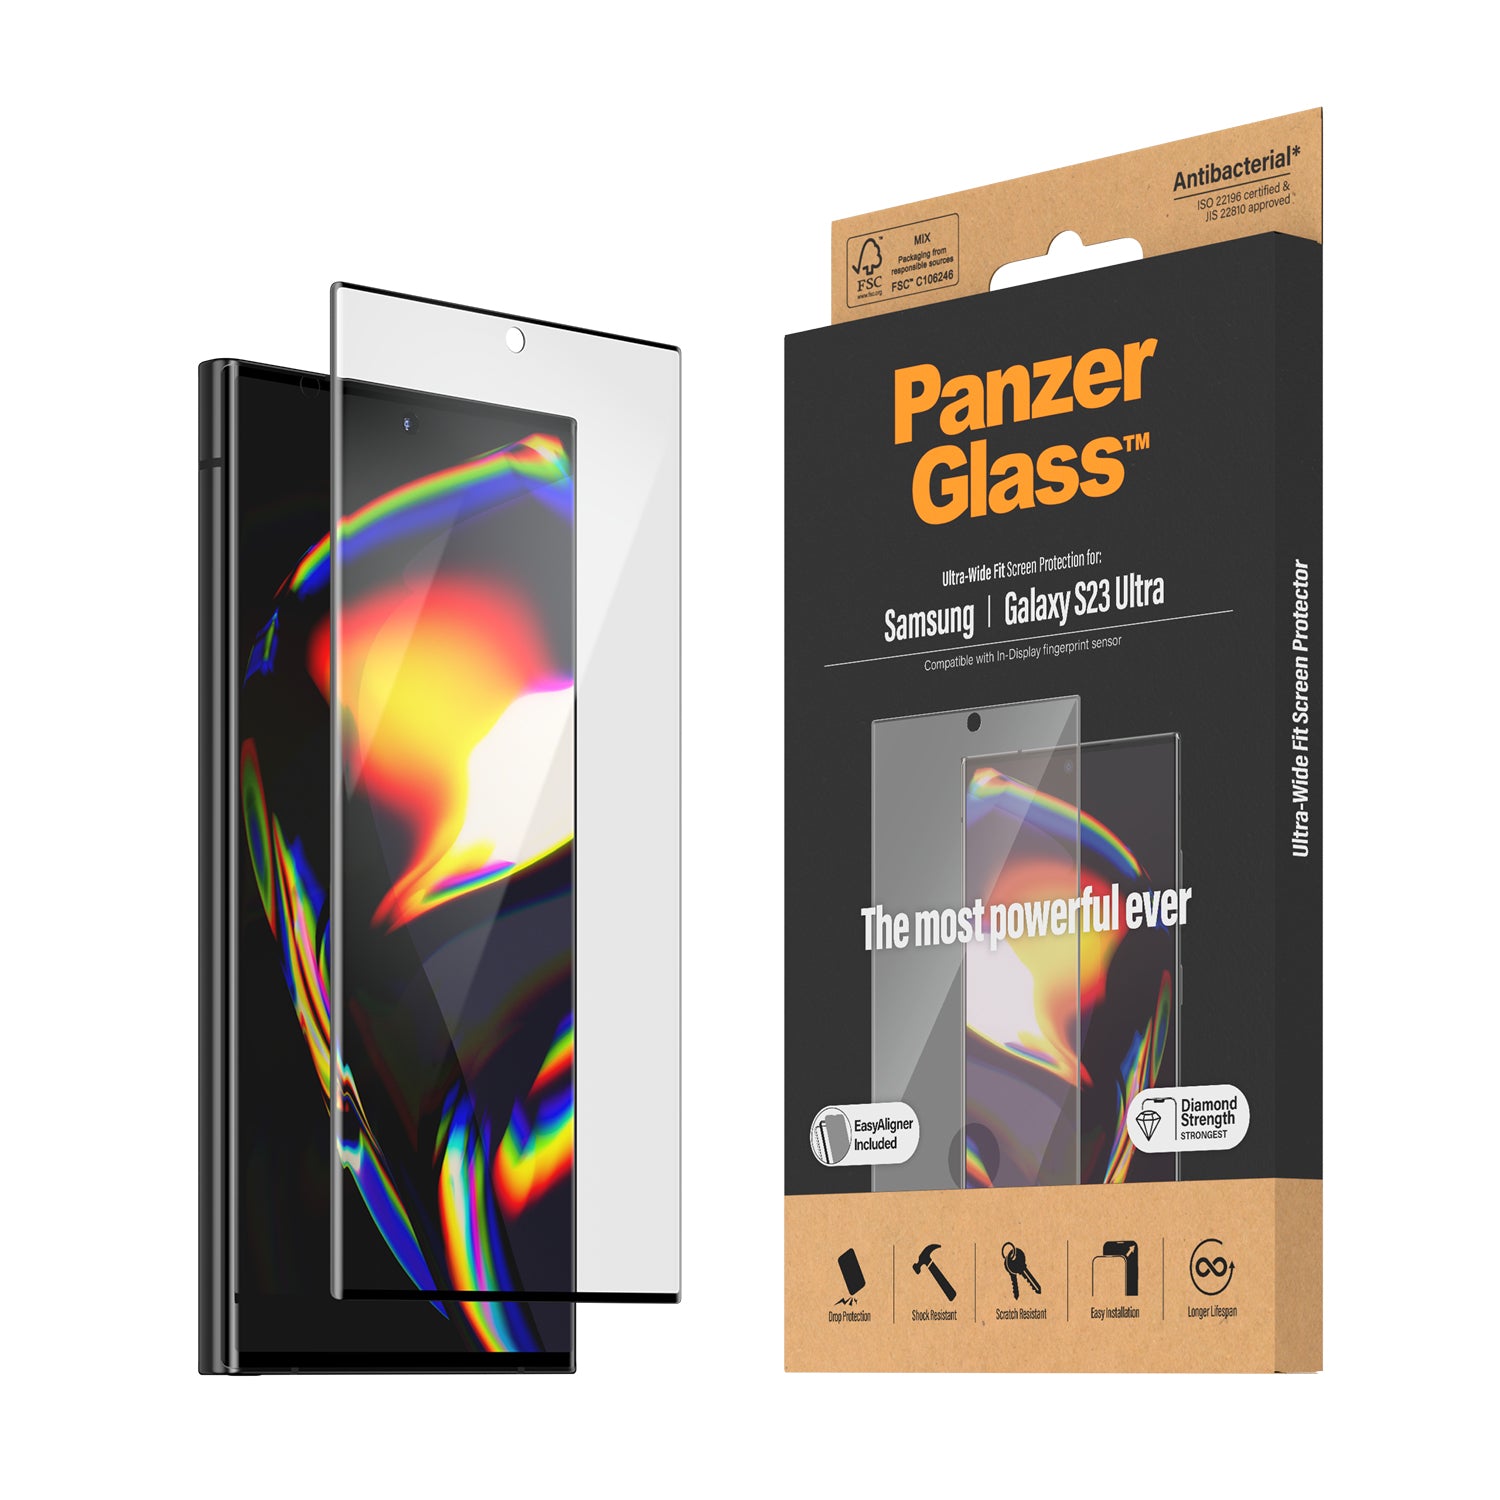 PanzerGlass™ Ultra-Wide fit with EasyAligner Screen Protector for Samsung Galaxy S23 Ultra.